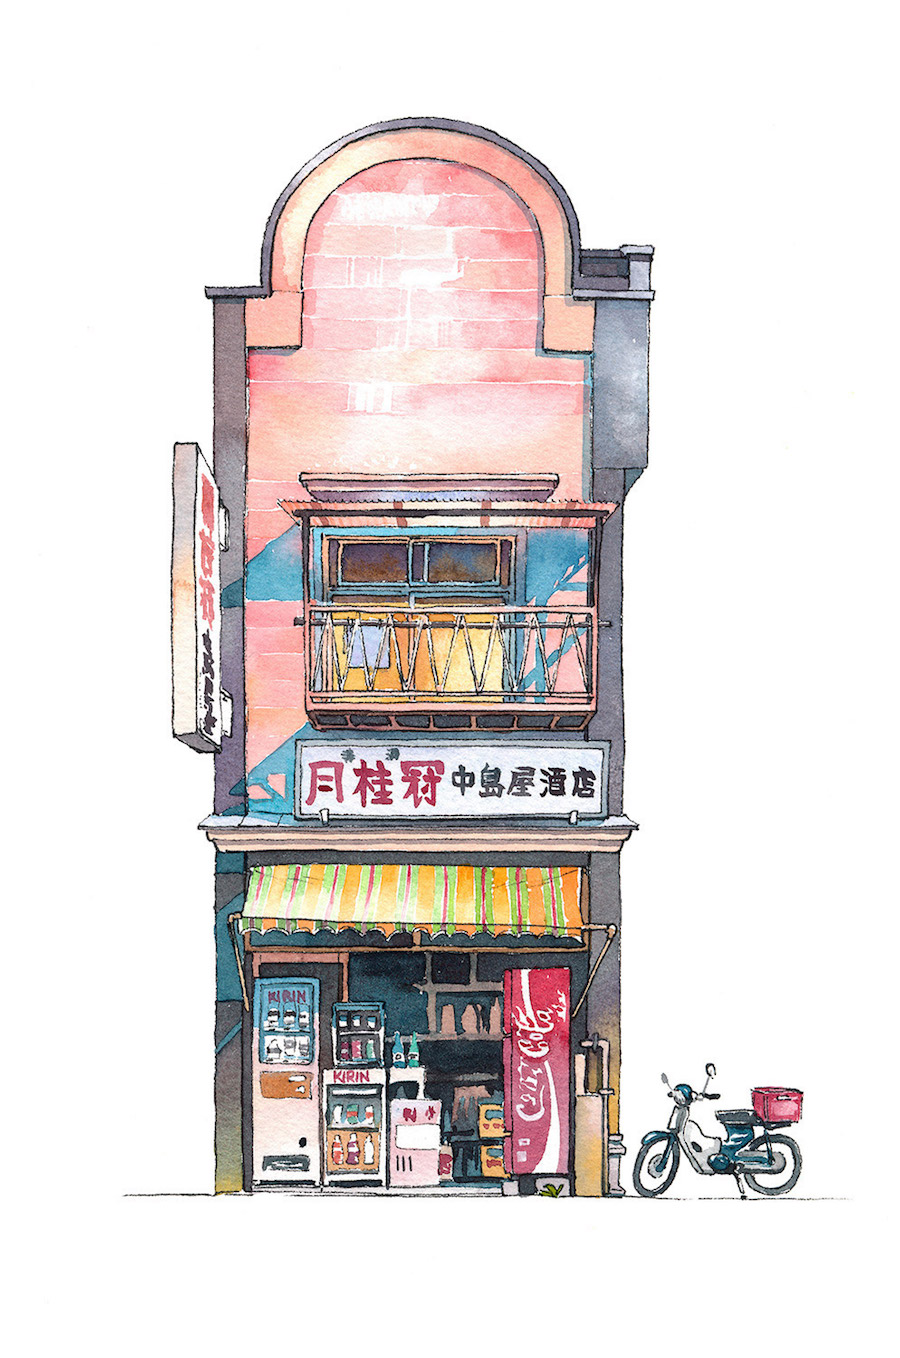 Magnificent Illustrations of Tokyo by Mateusz Urbanowicz7